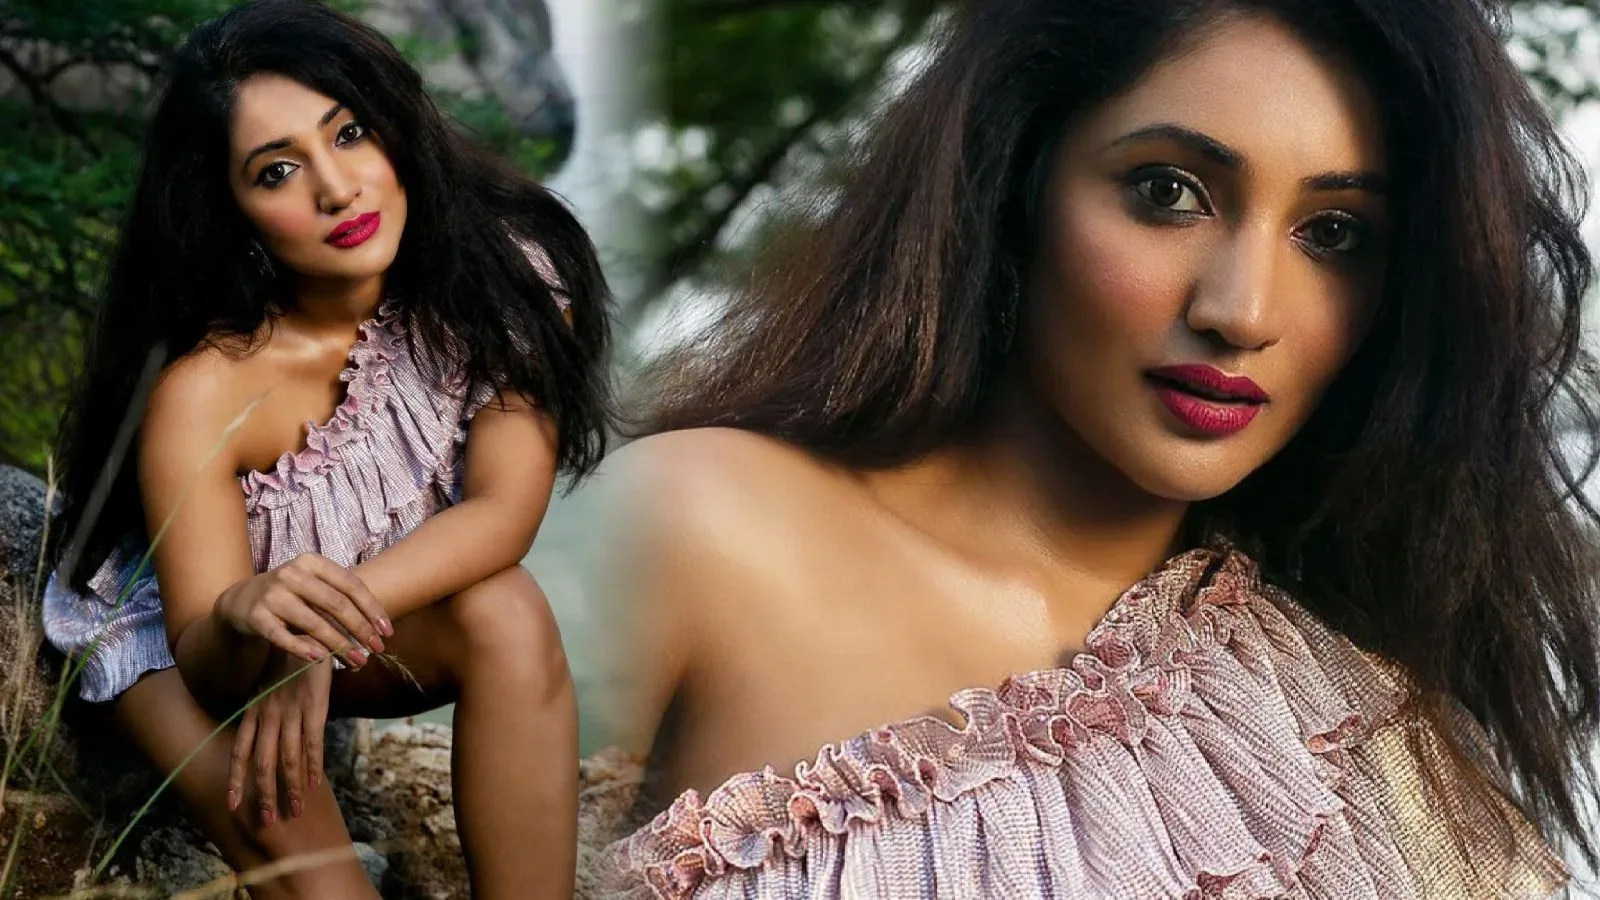 Bommu Lakshmi looks hot and stunning in this Photoshoot